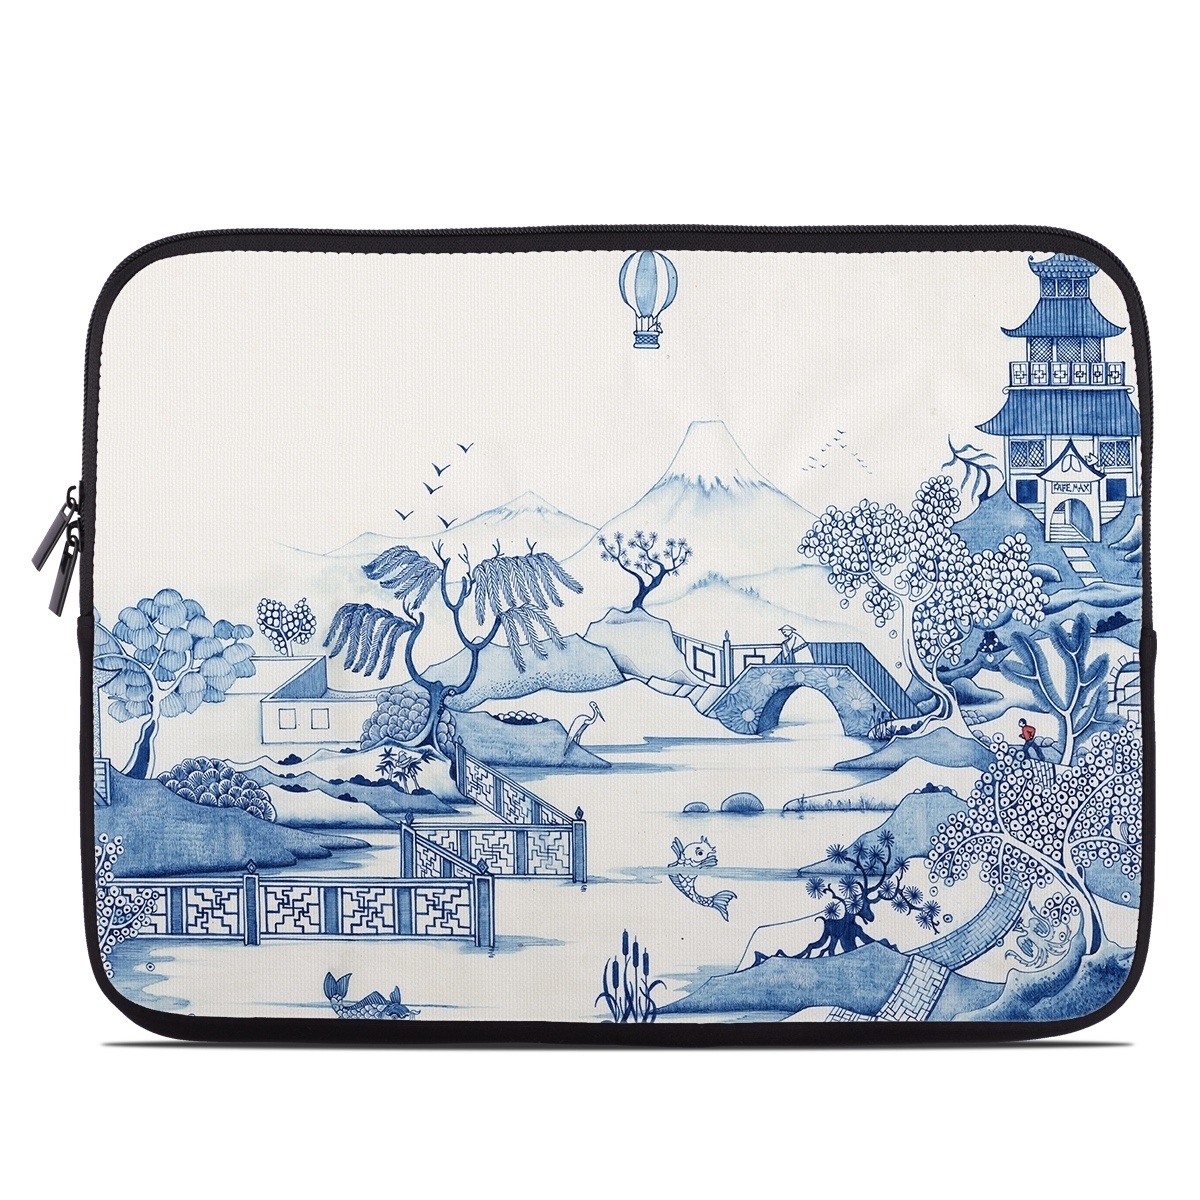 Laptop Sleeve - Blue Willow (Image 1)